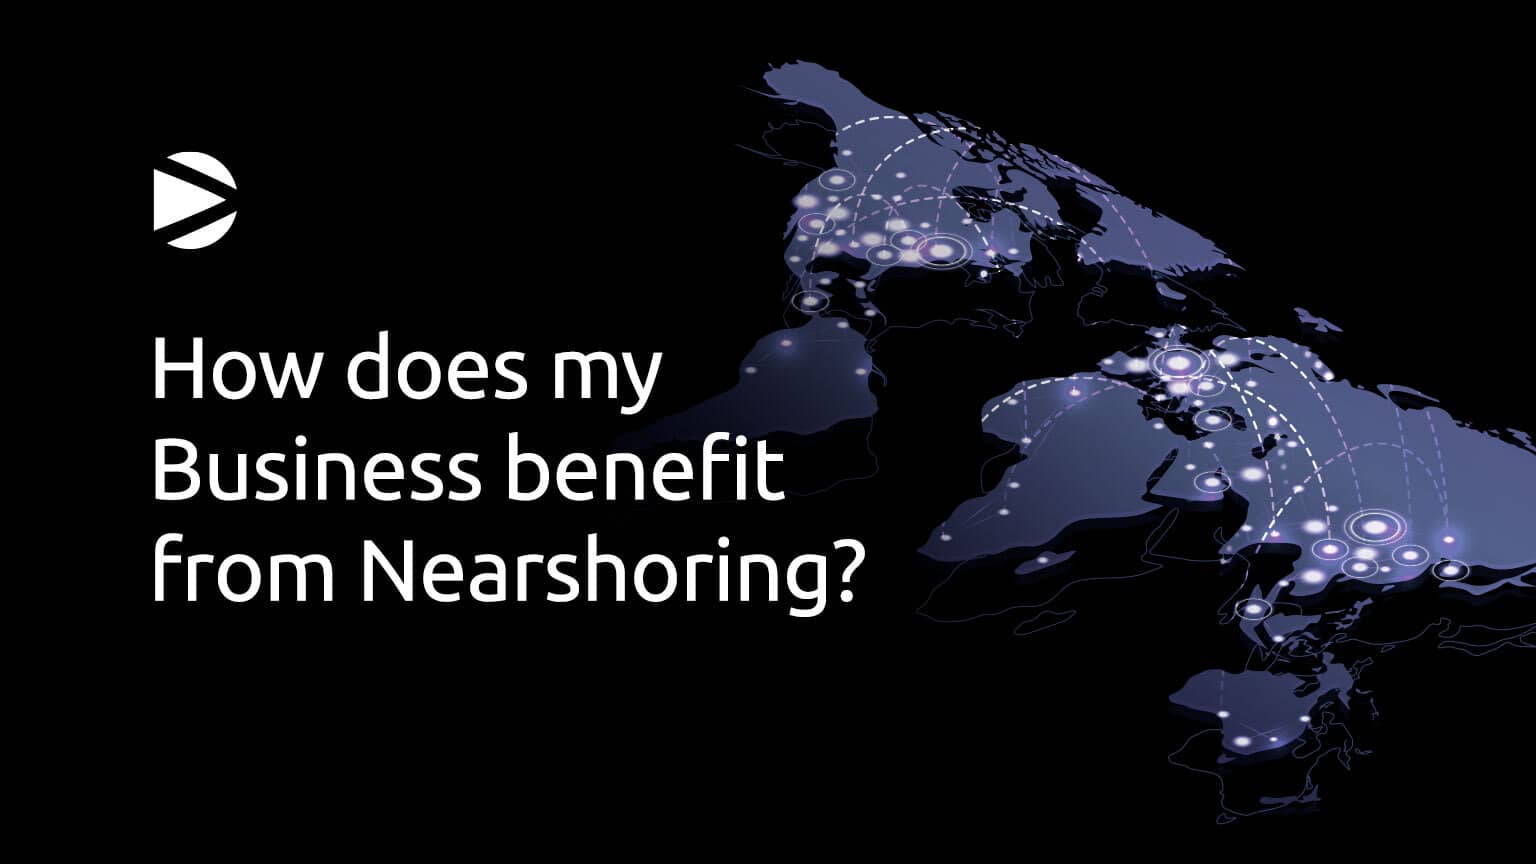 How does my Business benefit from Nearshoring?